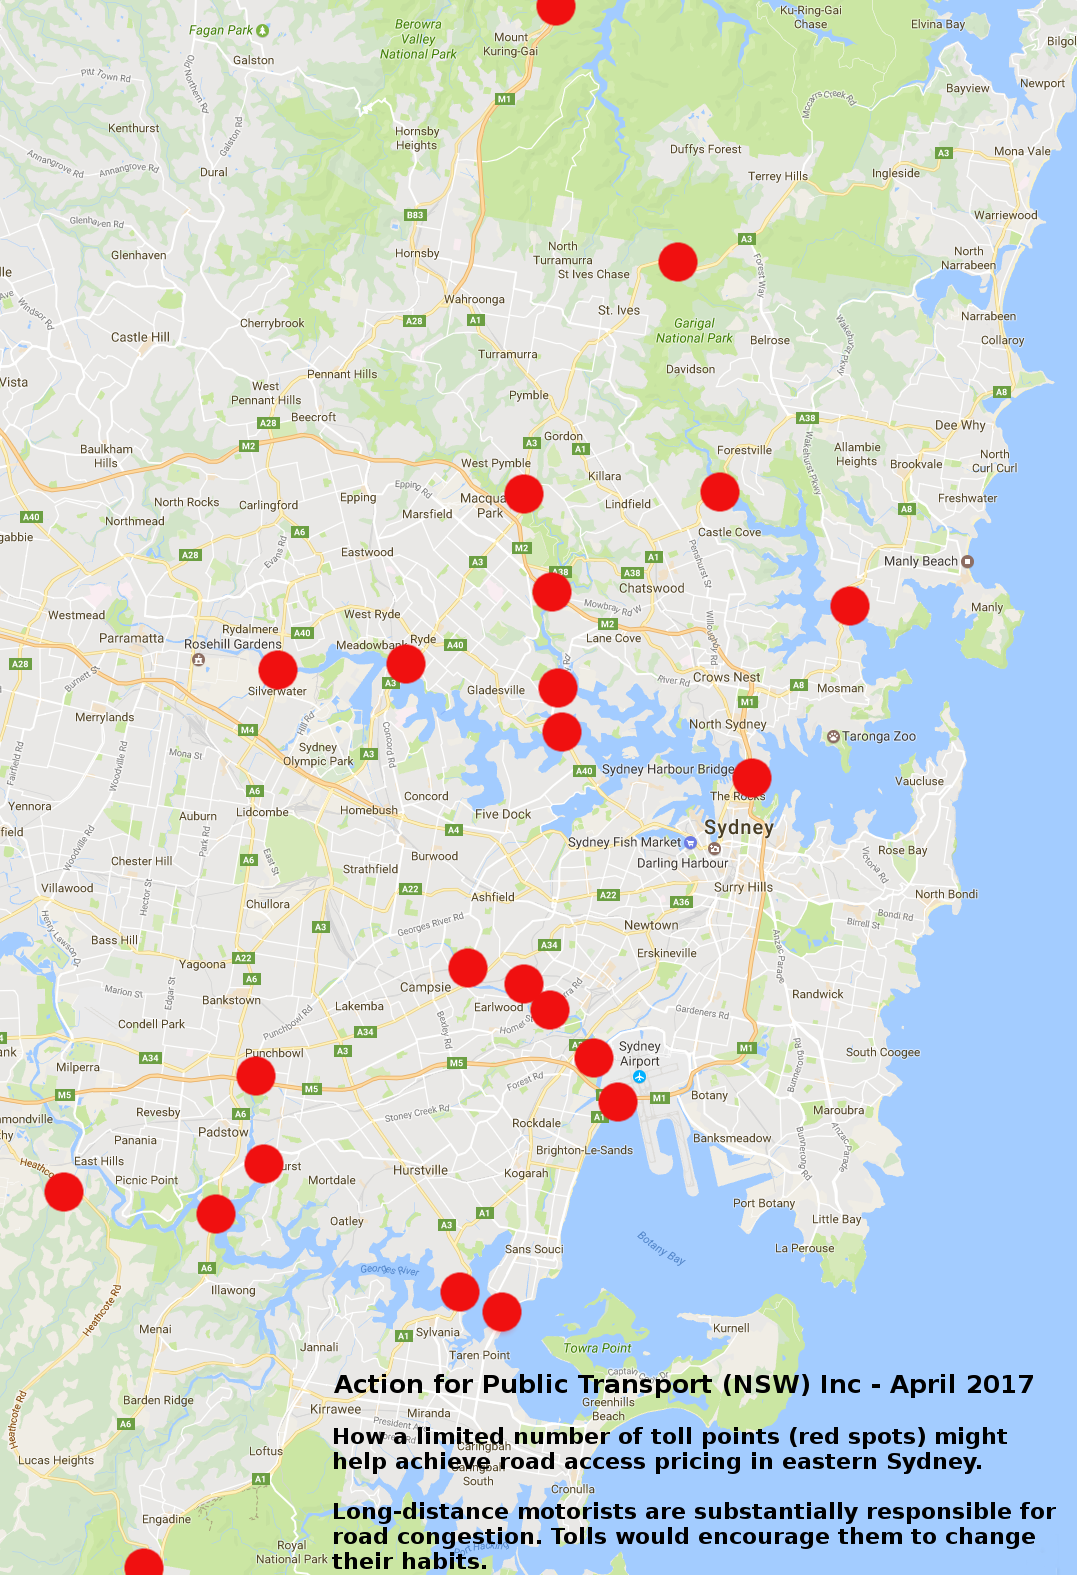 Possible toll points for eastern Sydney